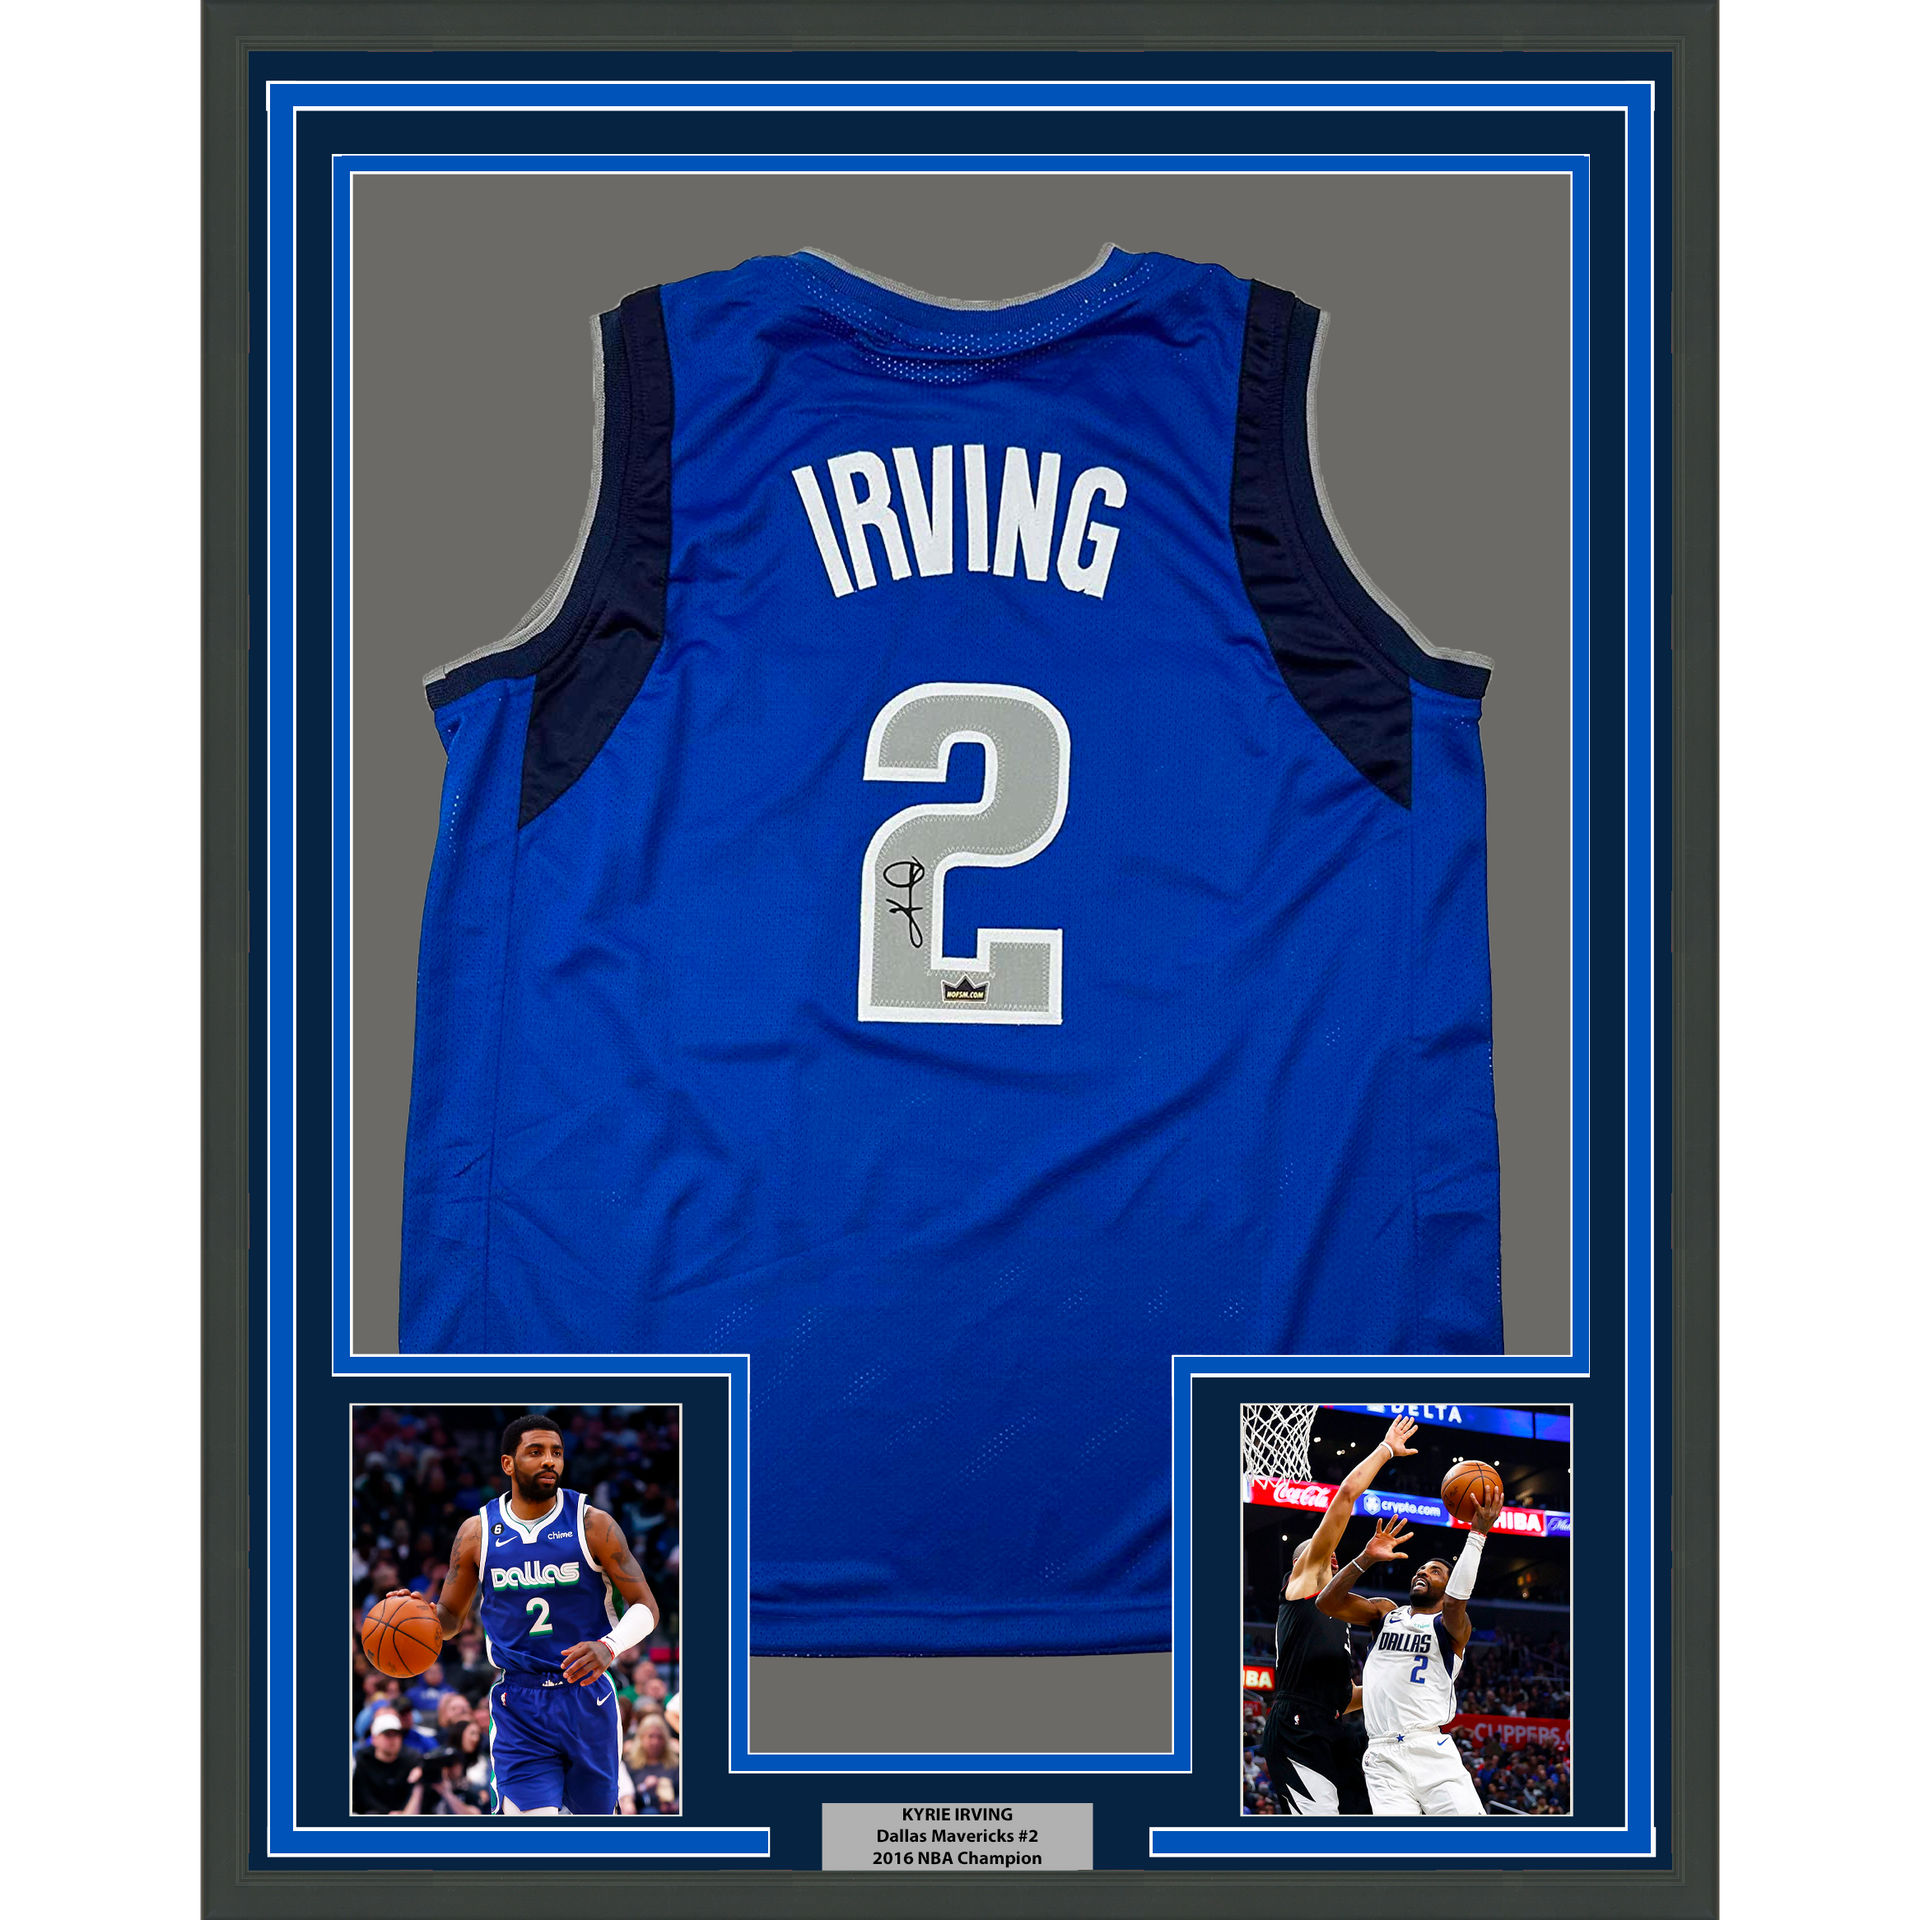 Order your Kyrie Irving Dallas Mavericks jersey today